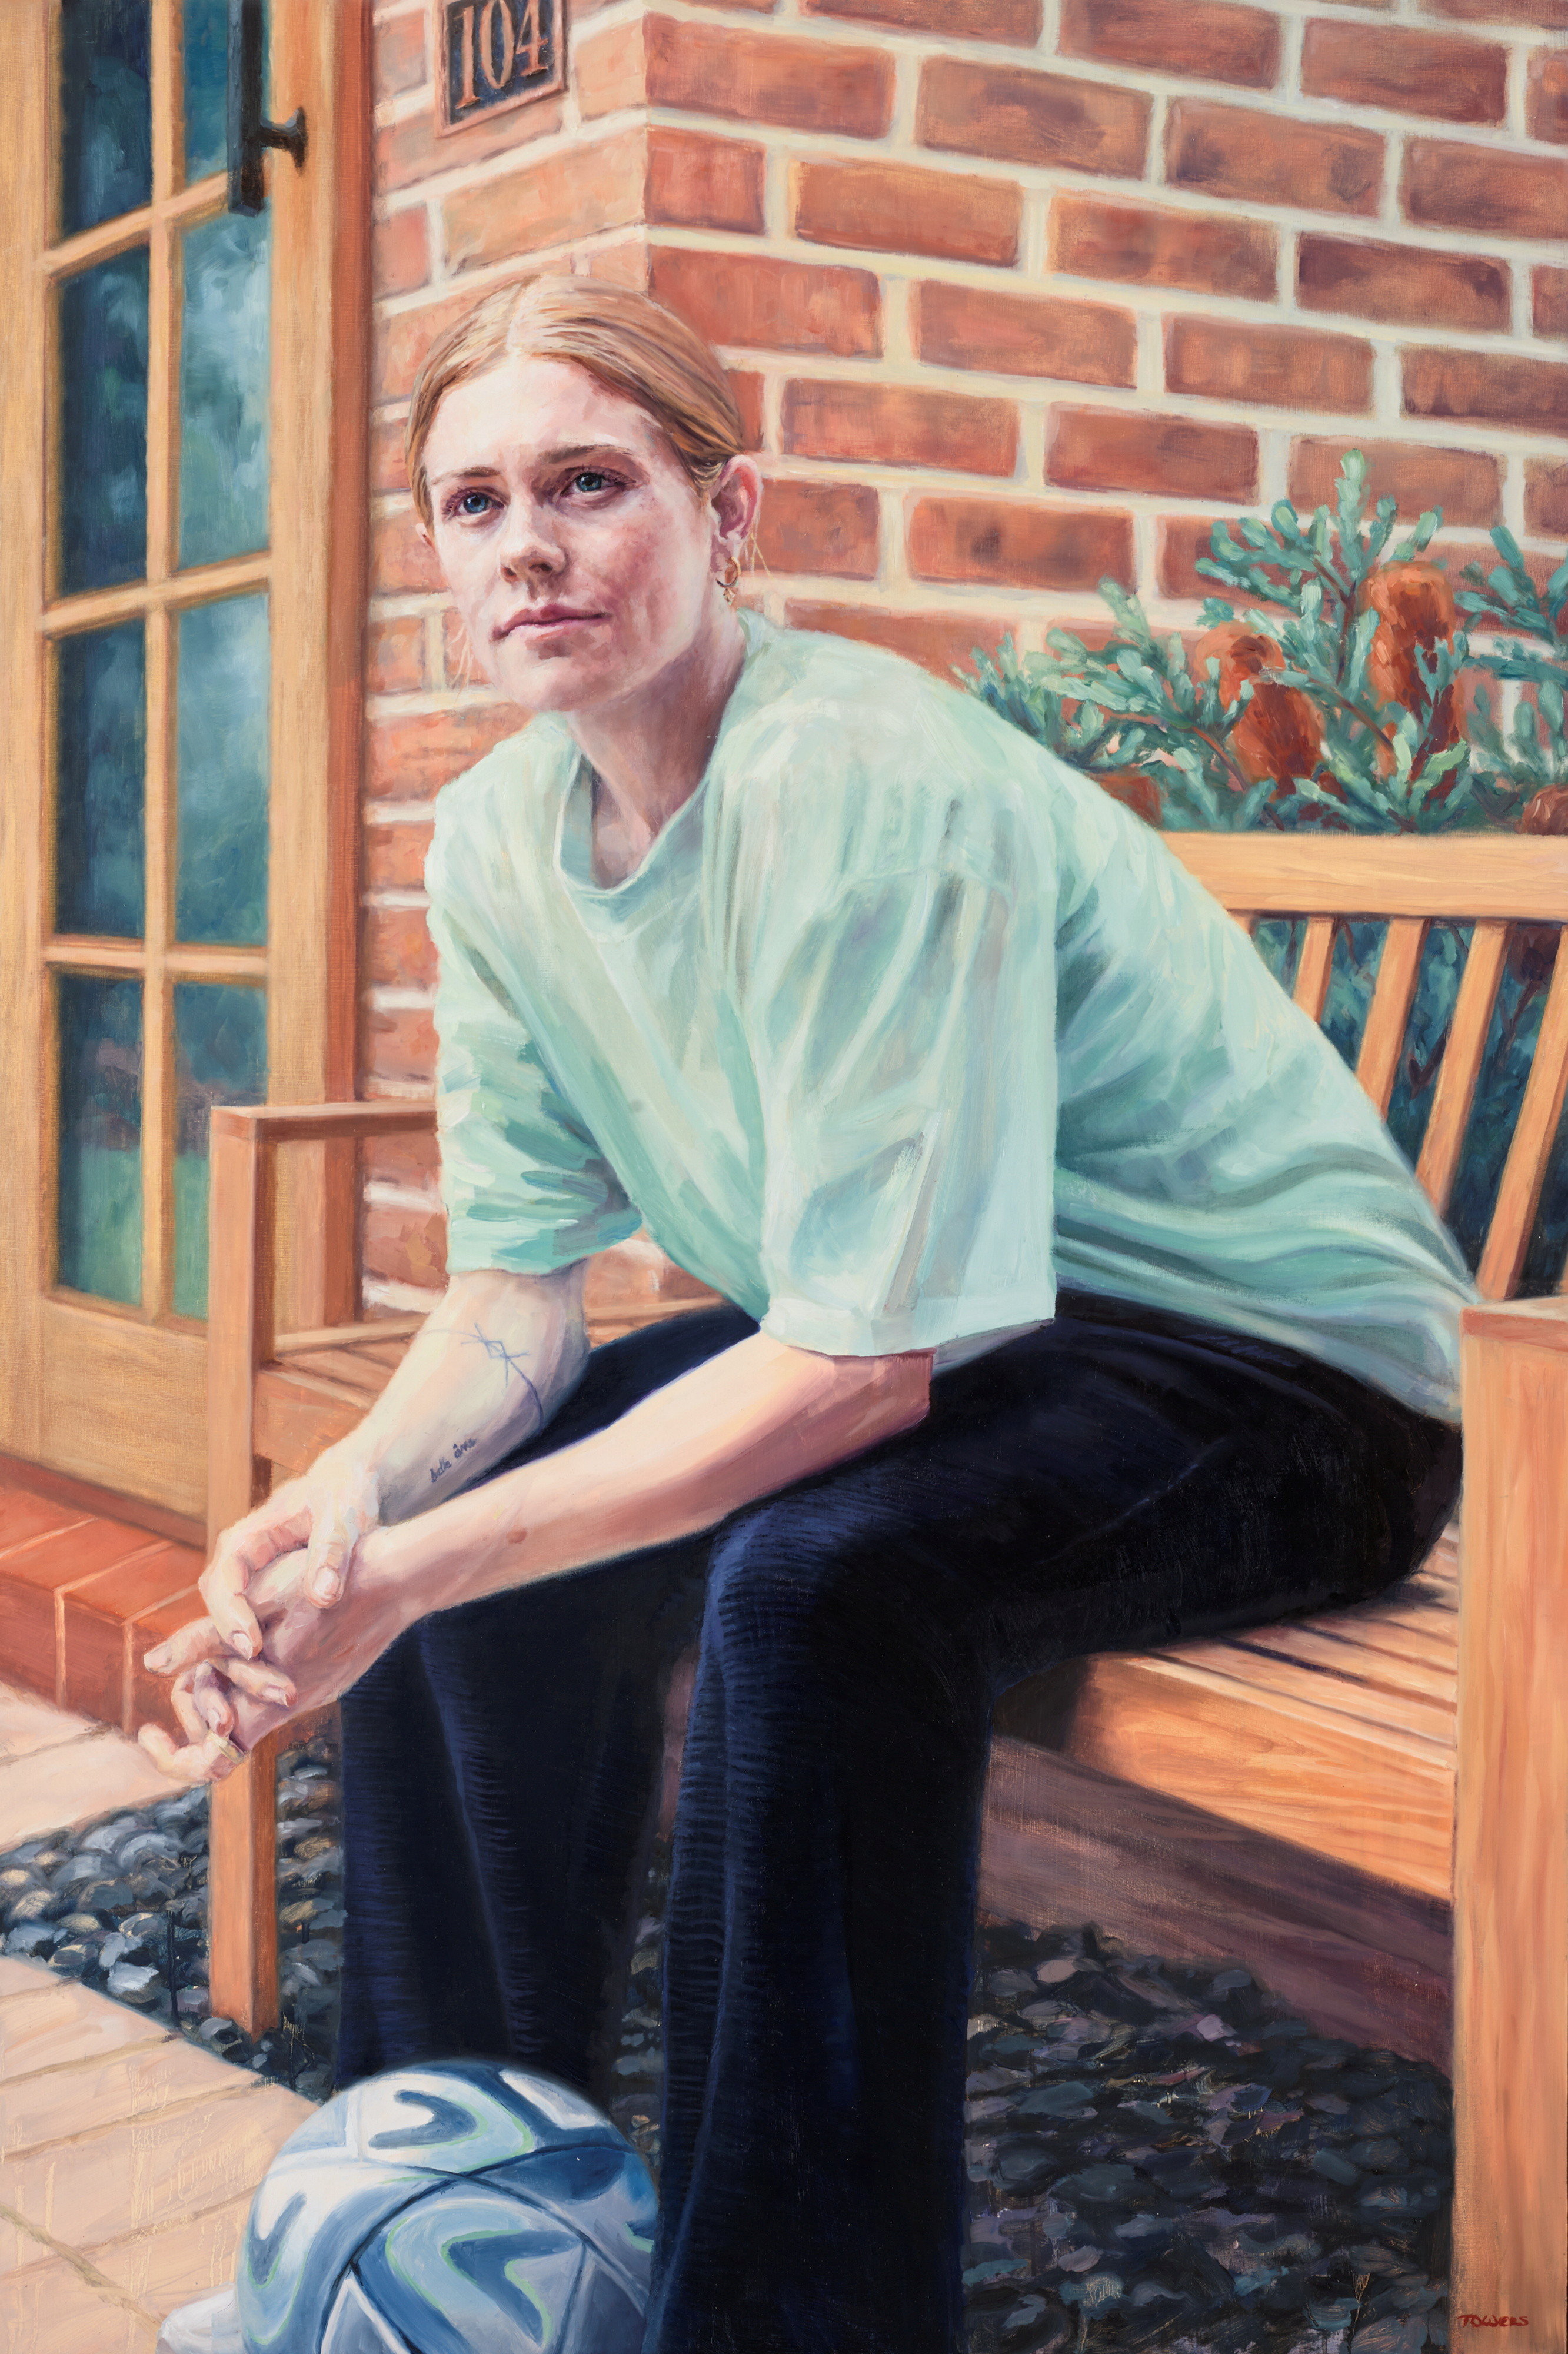 A portrait of Cortnee Vine, a white woman with red hair, sitting on a bench with a soccerball between her feet.